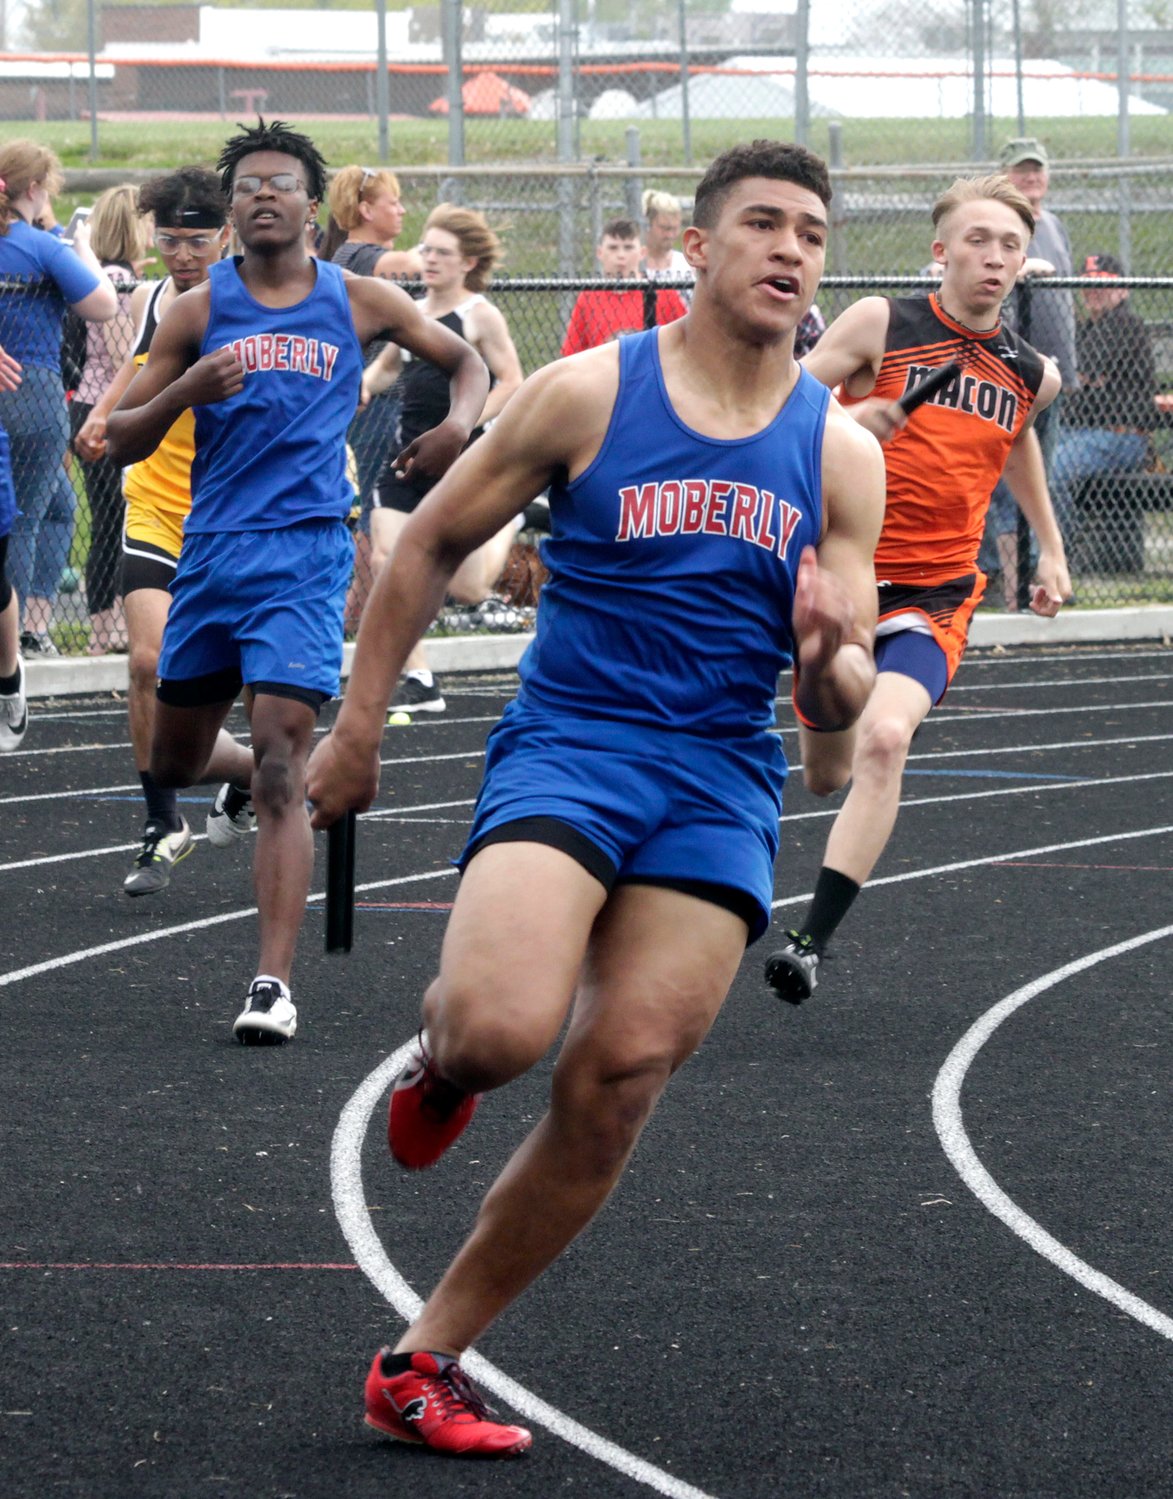 Upon receiving the baton from Mar'sean Winn, left, Moberly senior Jacksyn Miller grips the stick as he jets off running the third leg of the boys 4x200m relay race Tuesday during the Gerald Mansfield Track Invitational held at Macon. Miller and his Spartans comrades placed second in this event, and the same group won the 100m relay.